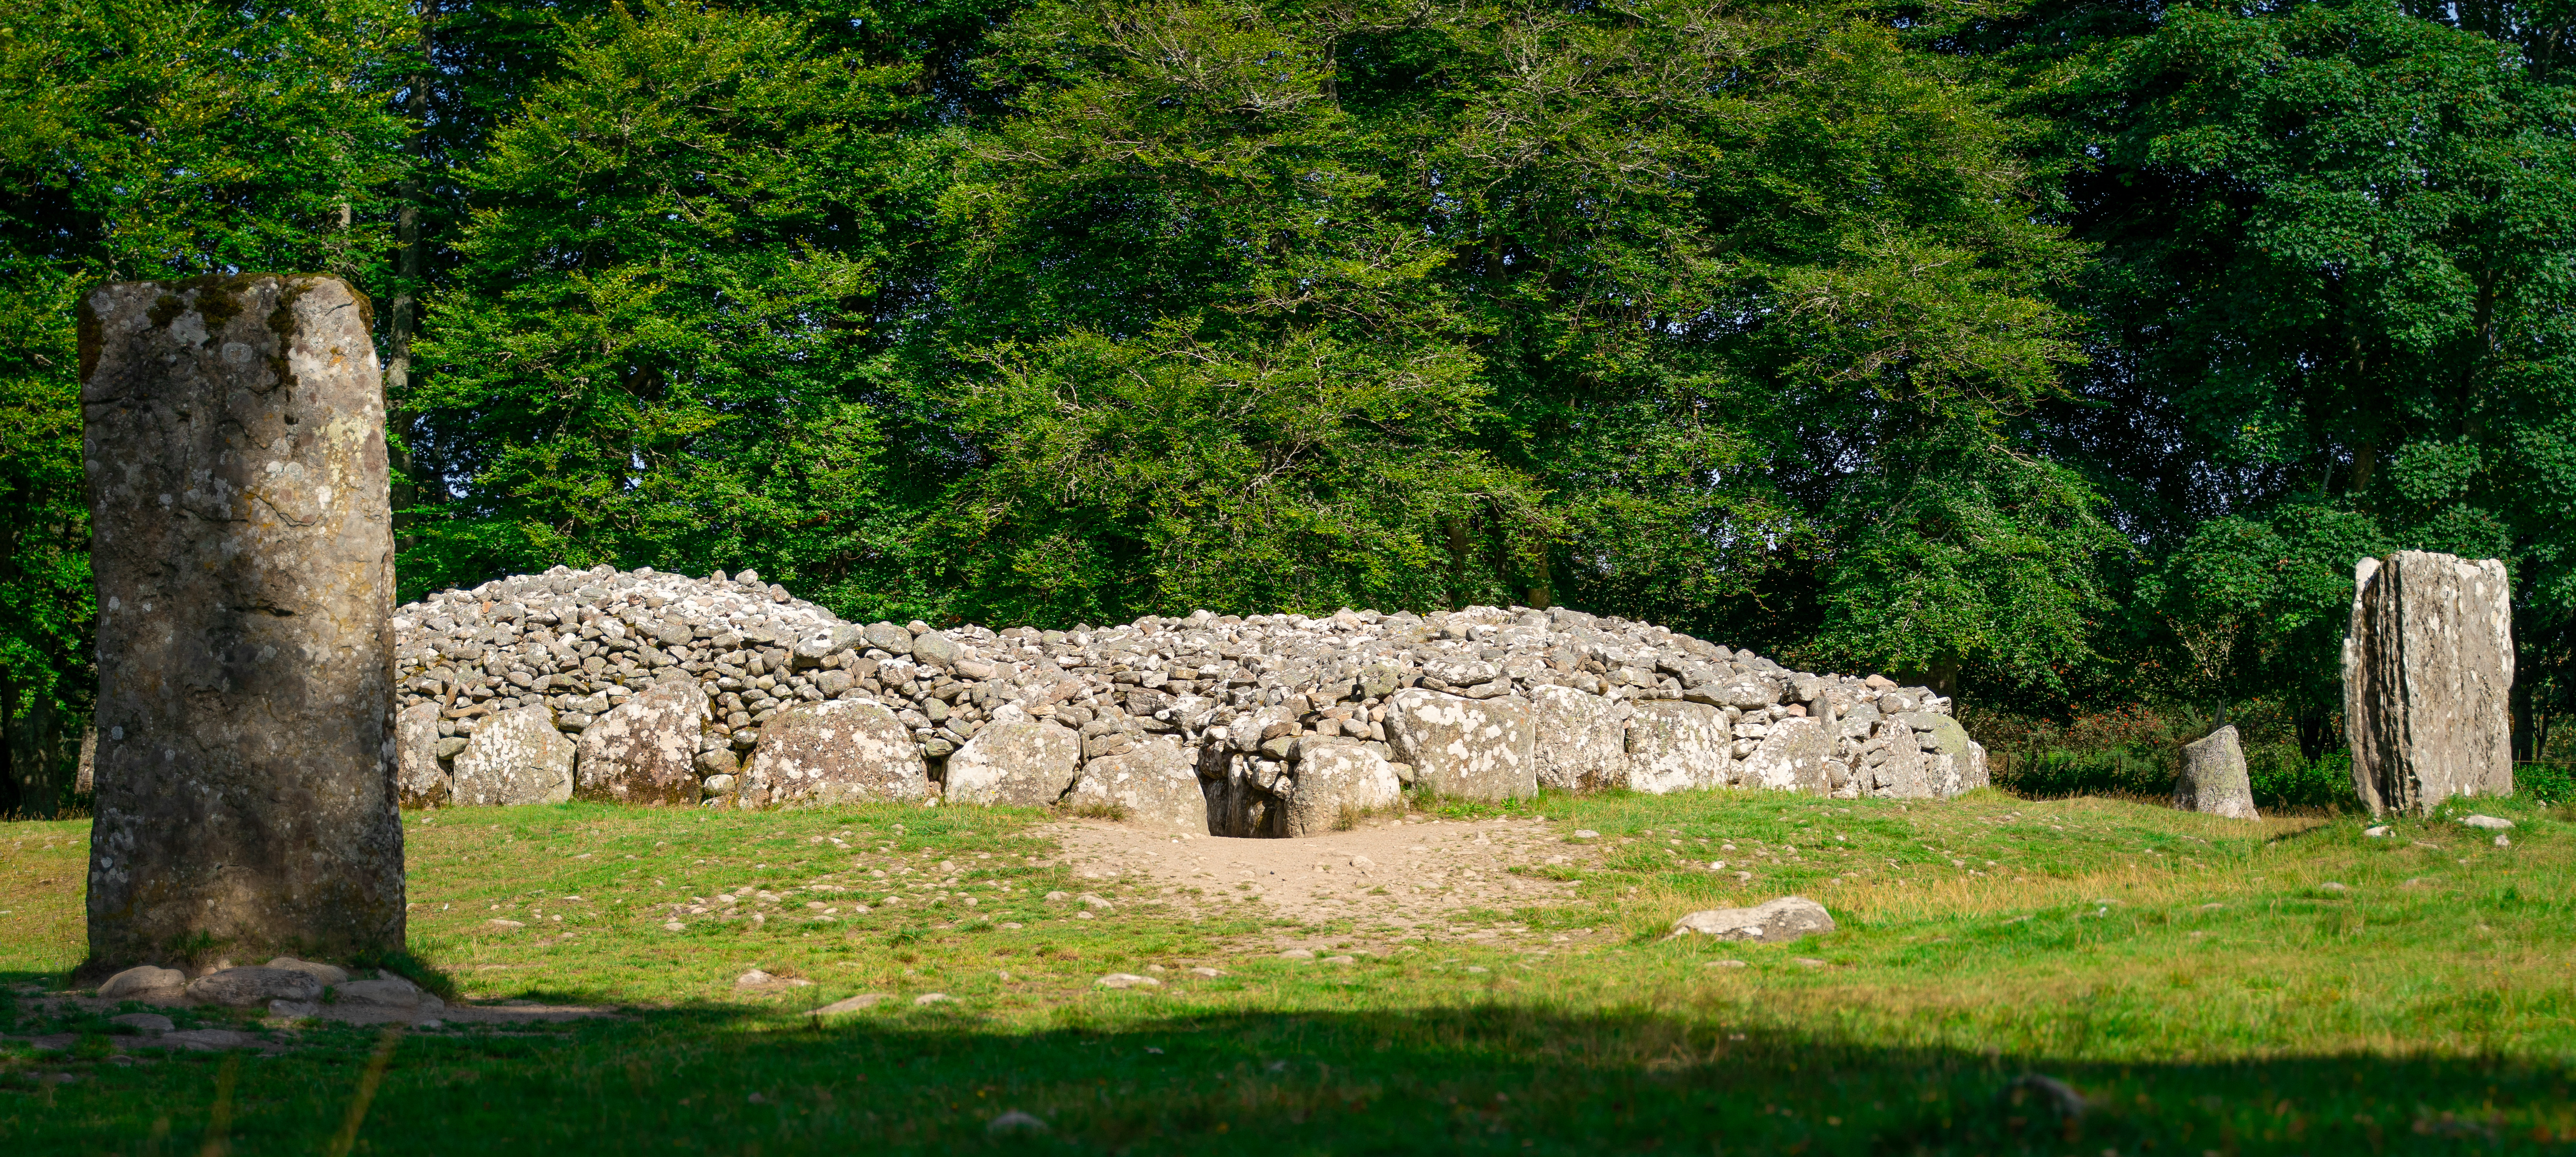 Entrance to the Clava Cairns. The low lying, long cairn is flanked by stone pillars.